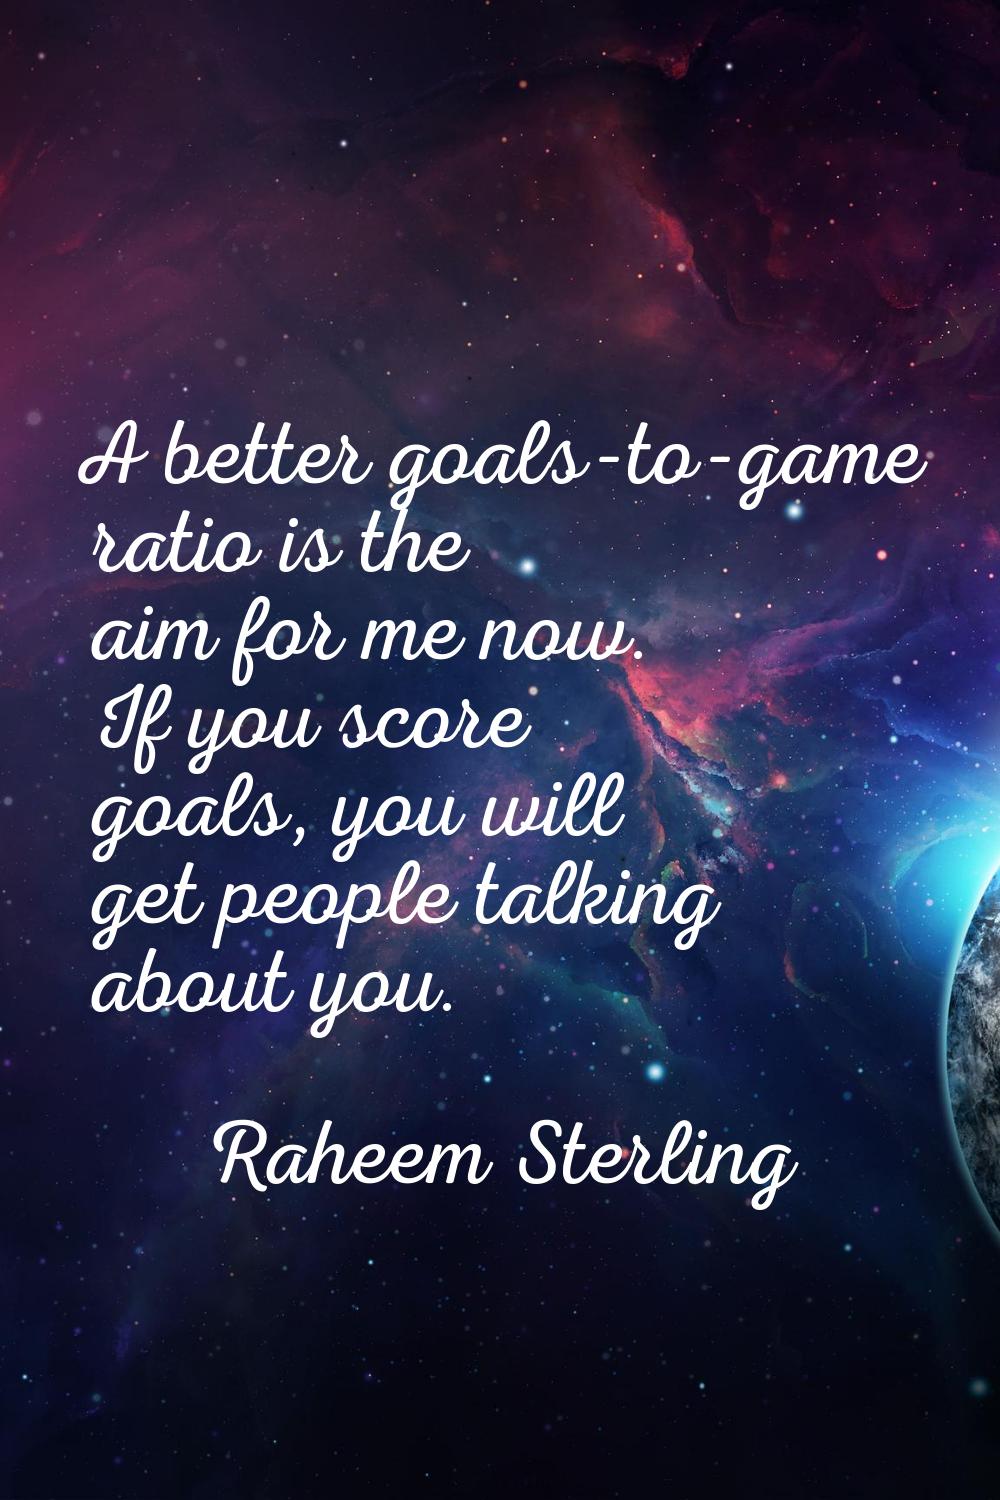 A better goals-to-game ratio is the aim for me now. If you score goals, you will get people talking